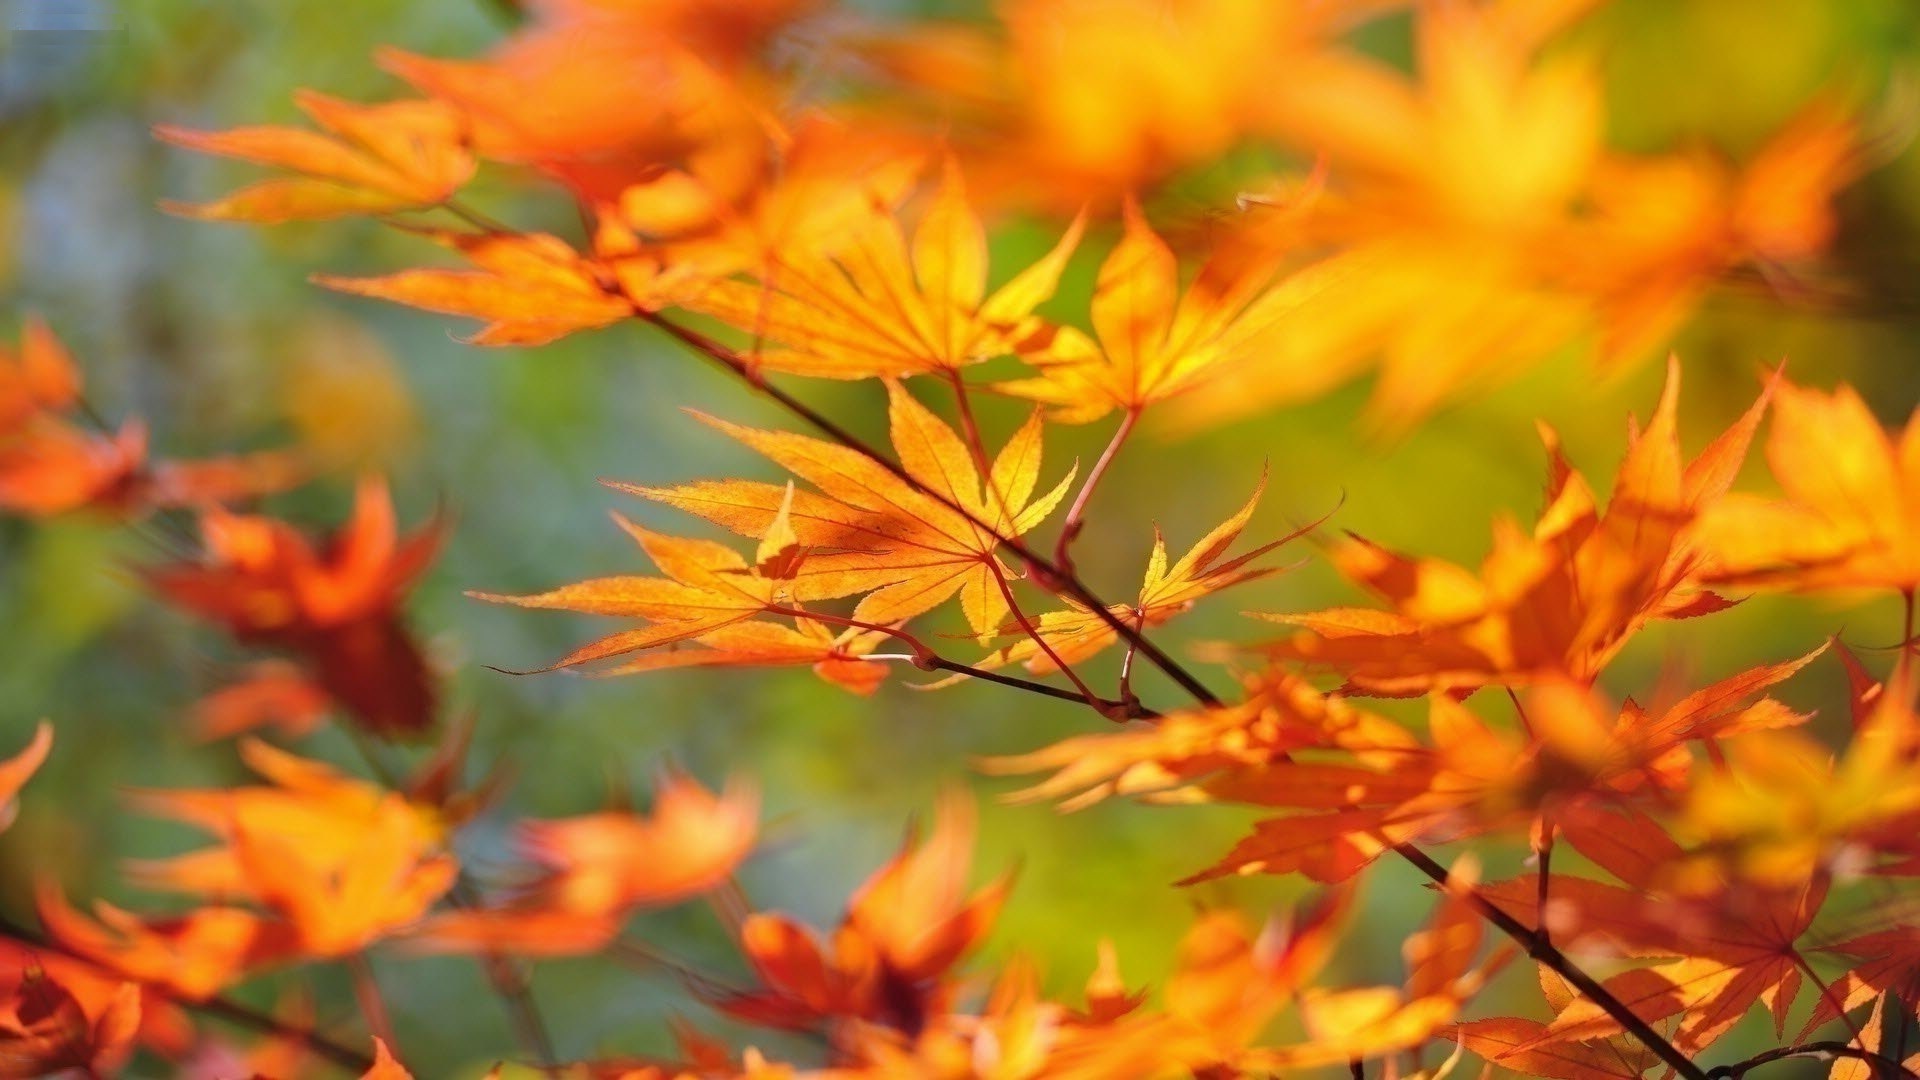 Autumn Leaves HD Wallpaper This